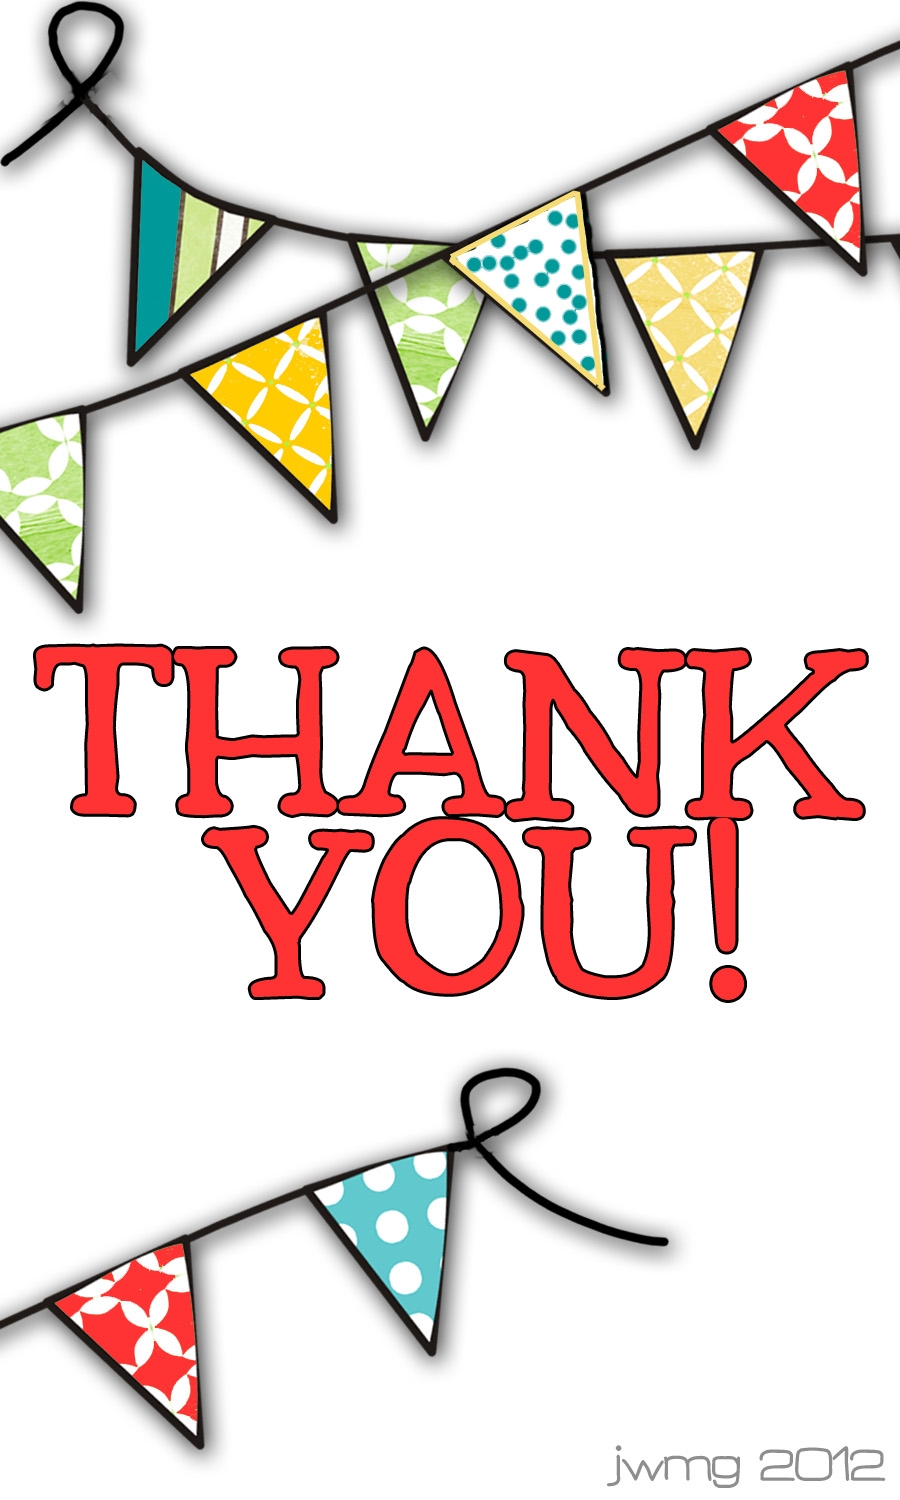 thank you volunteers clipart - photo #19